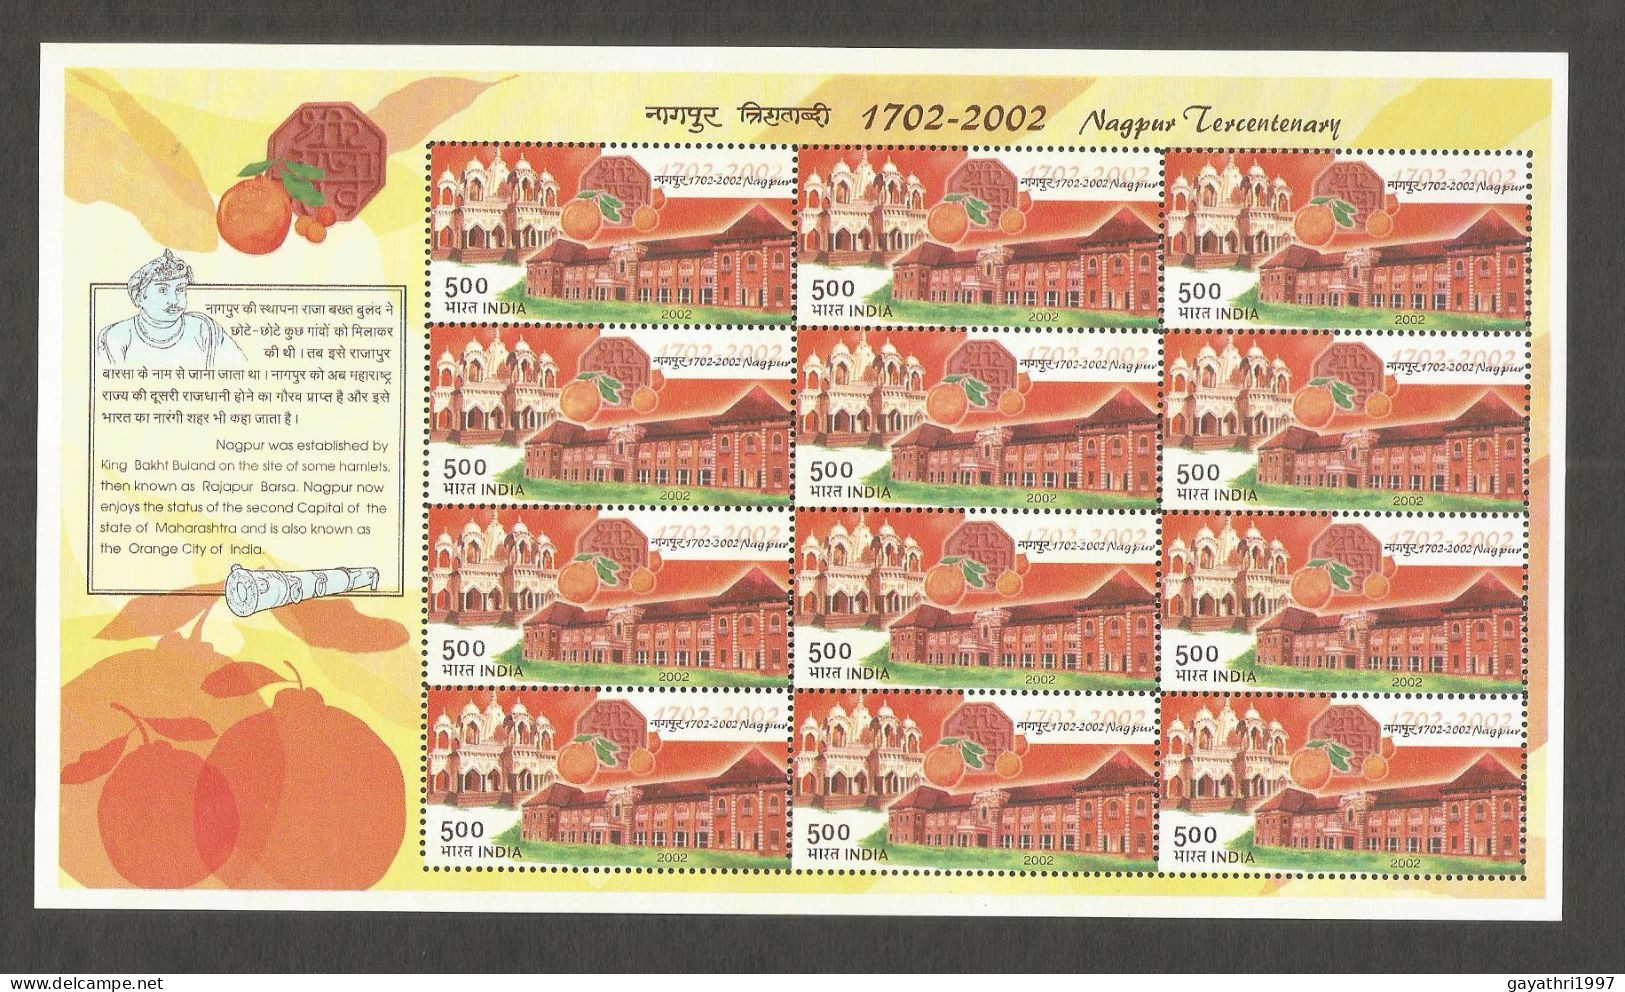 India 2002 Nagpur Tercentenary  MINT SHEET LET Good Condition   (SL 3) - Unused Stamps